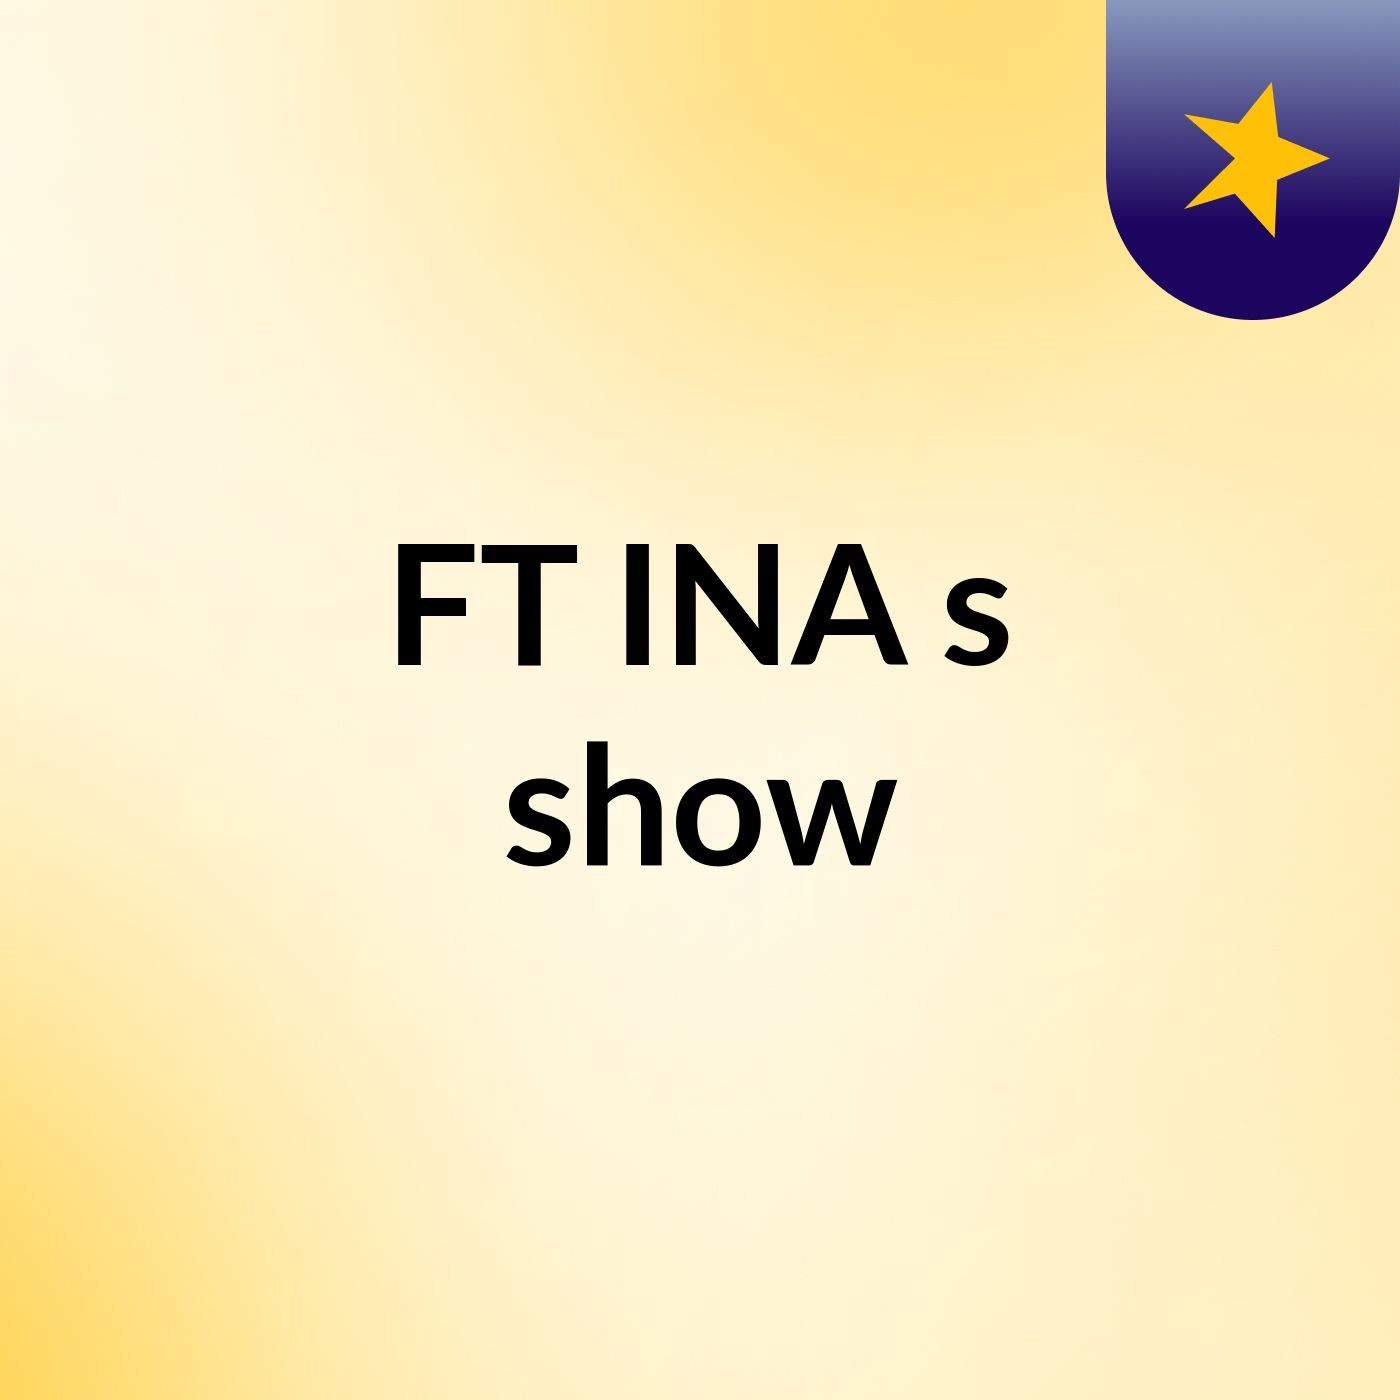 FT INA's show